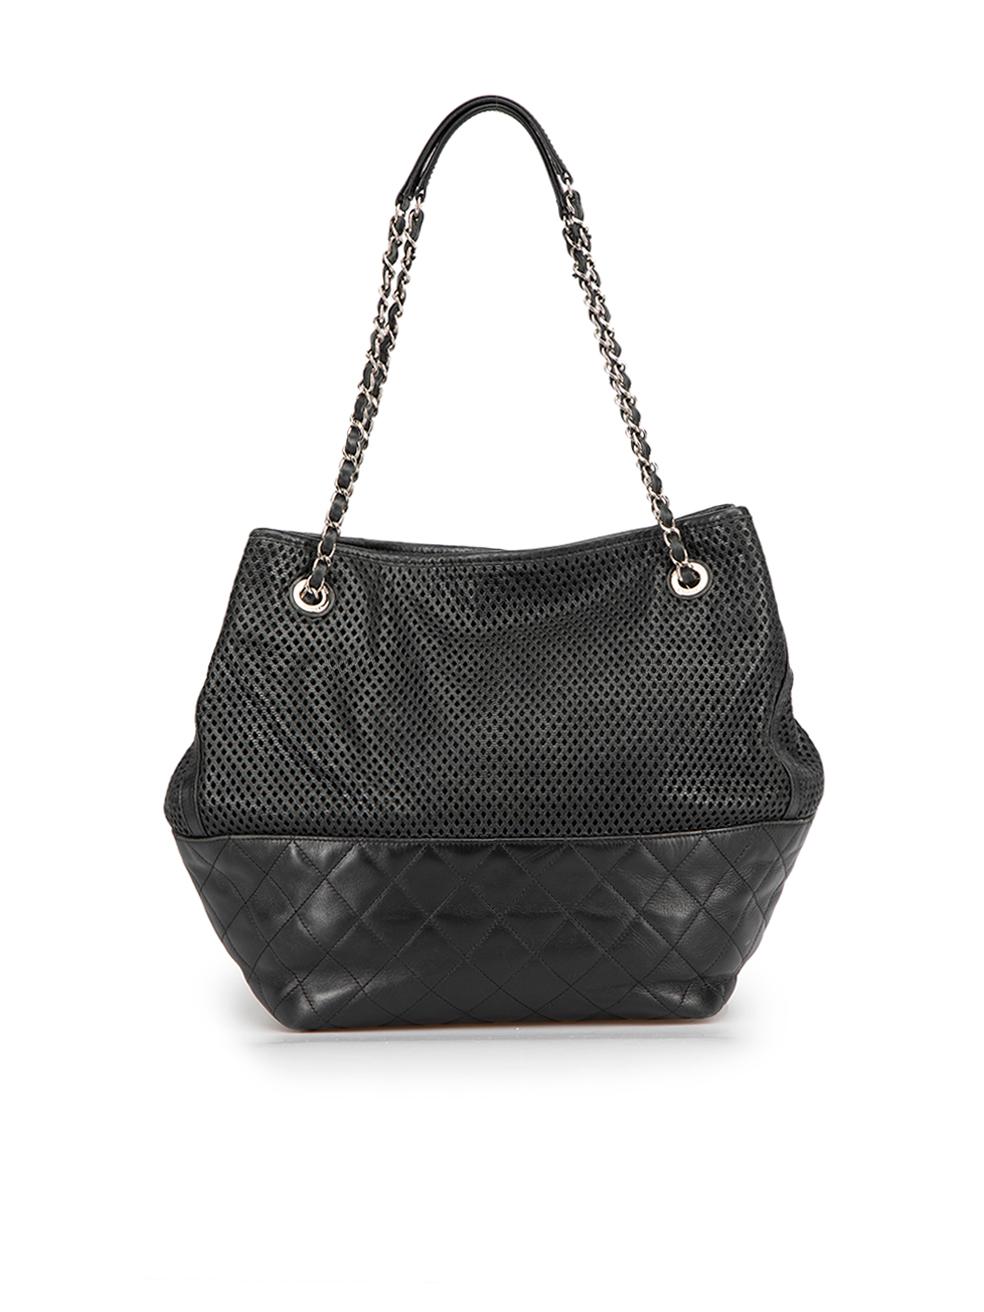 Chanel Women's Black Leather CC Up In The Air Tote In Good Condition For Sale In London, GB